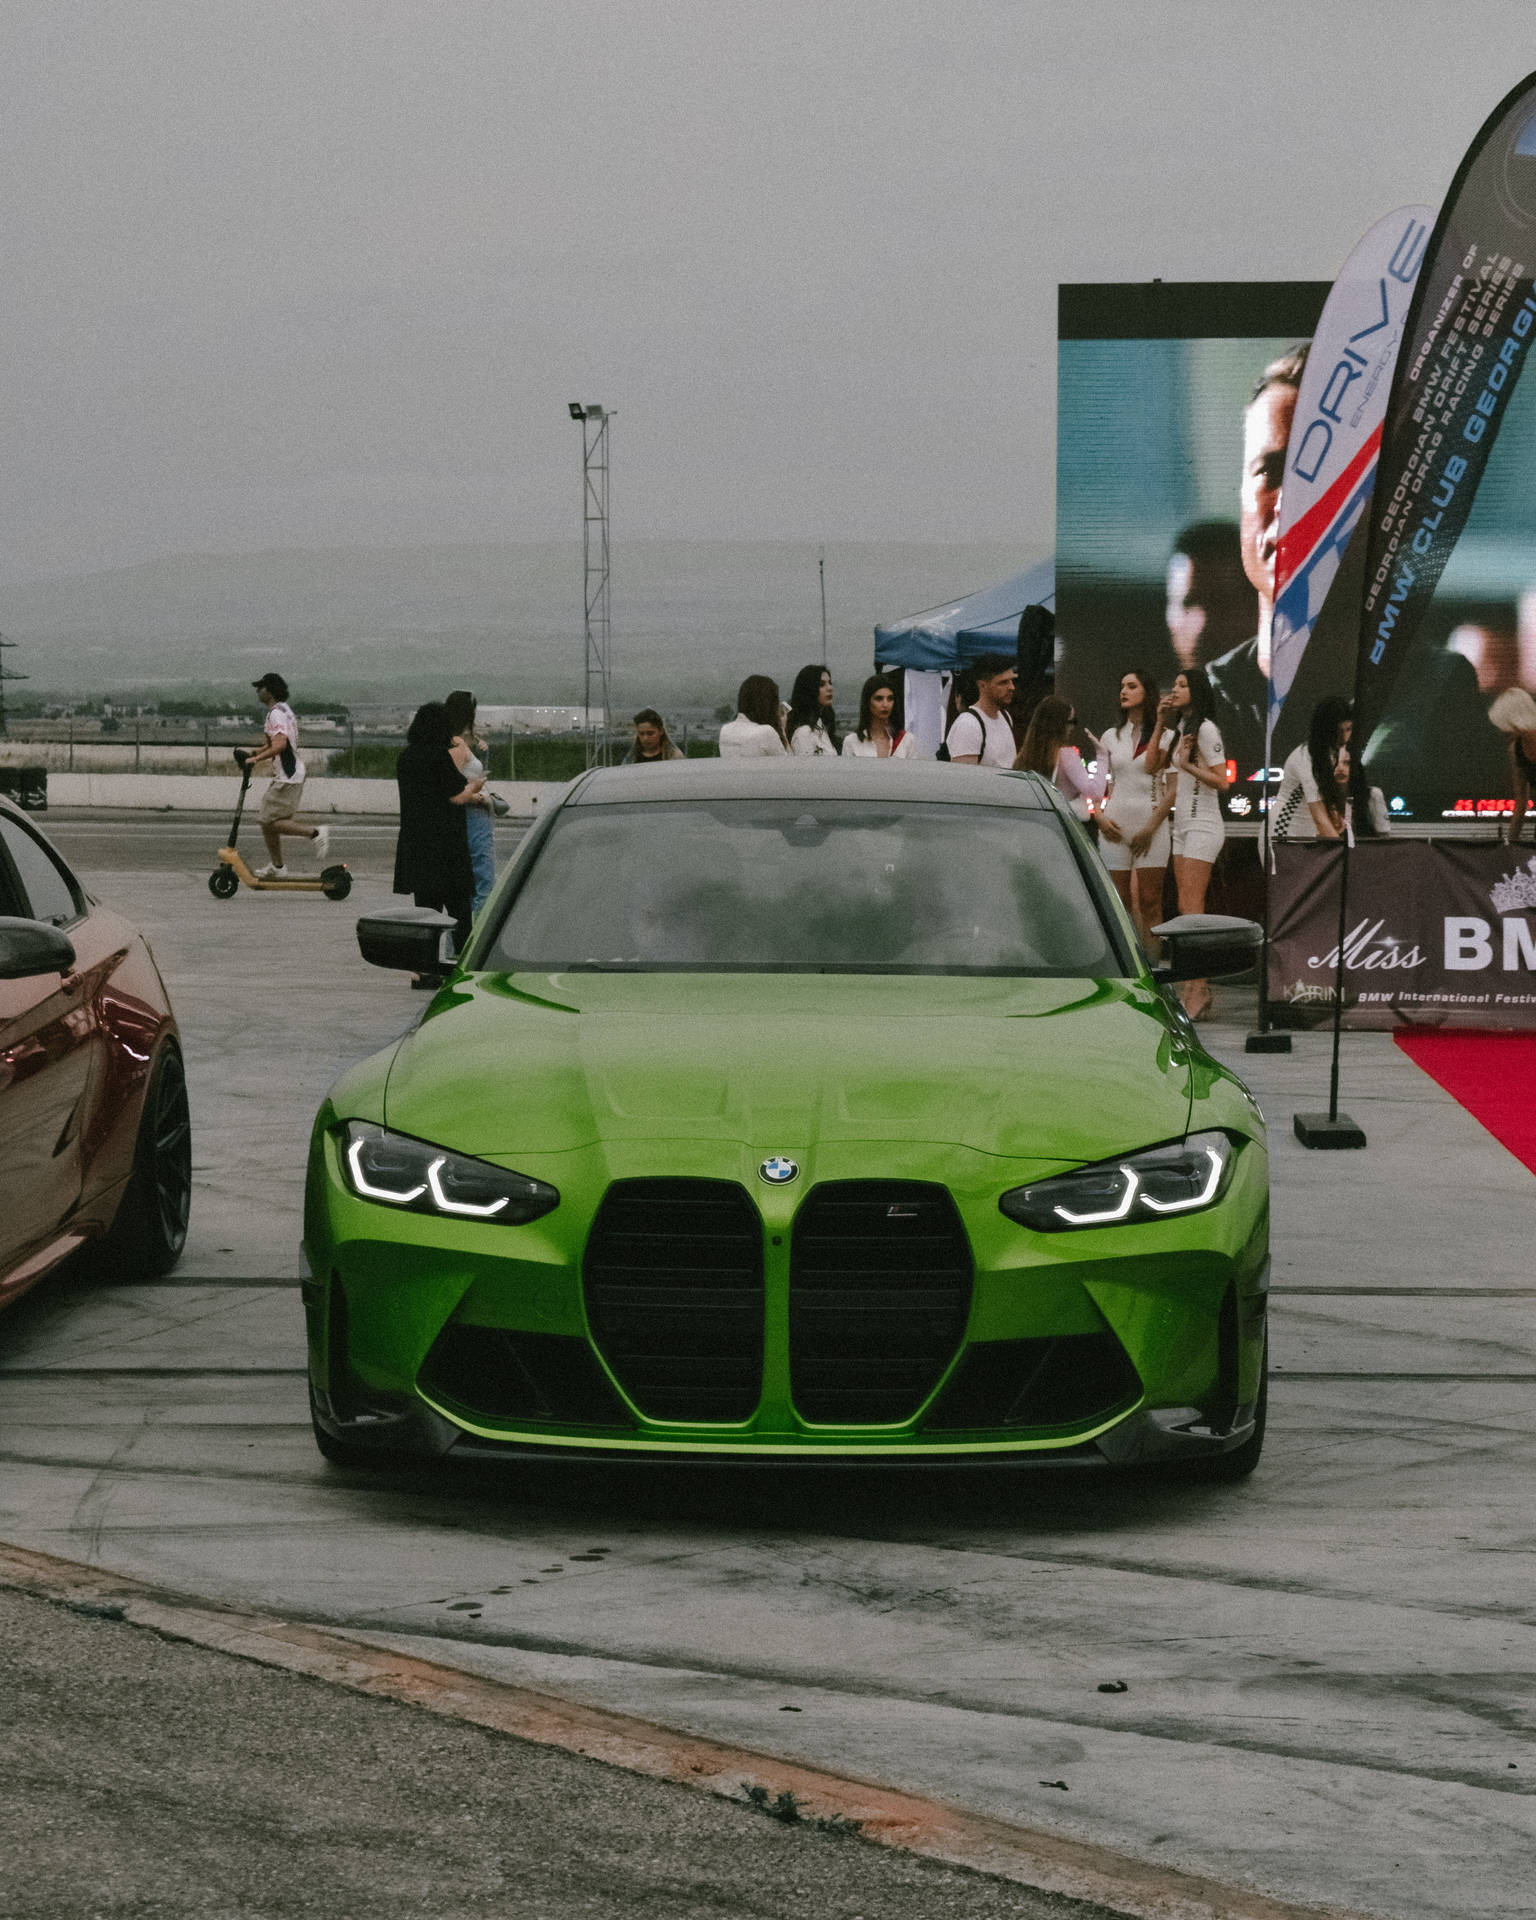 Green Bmw G80 At Racing Track Background